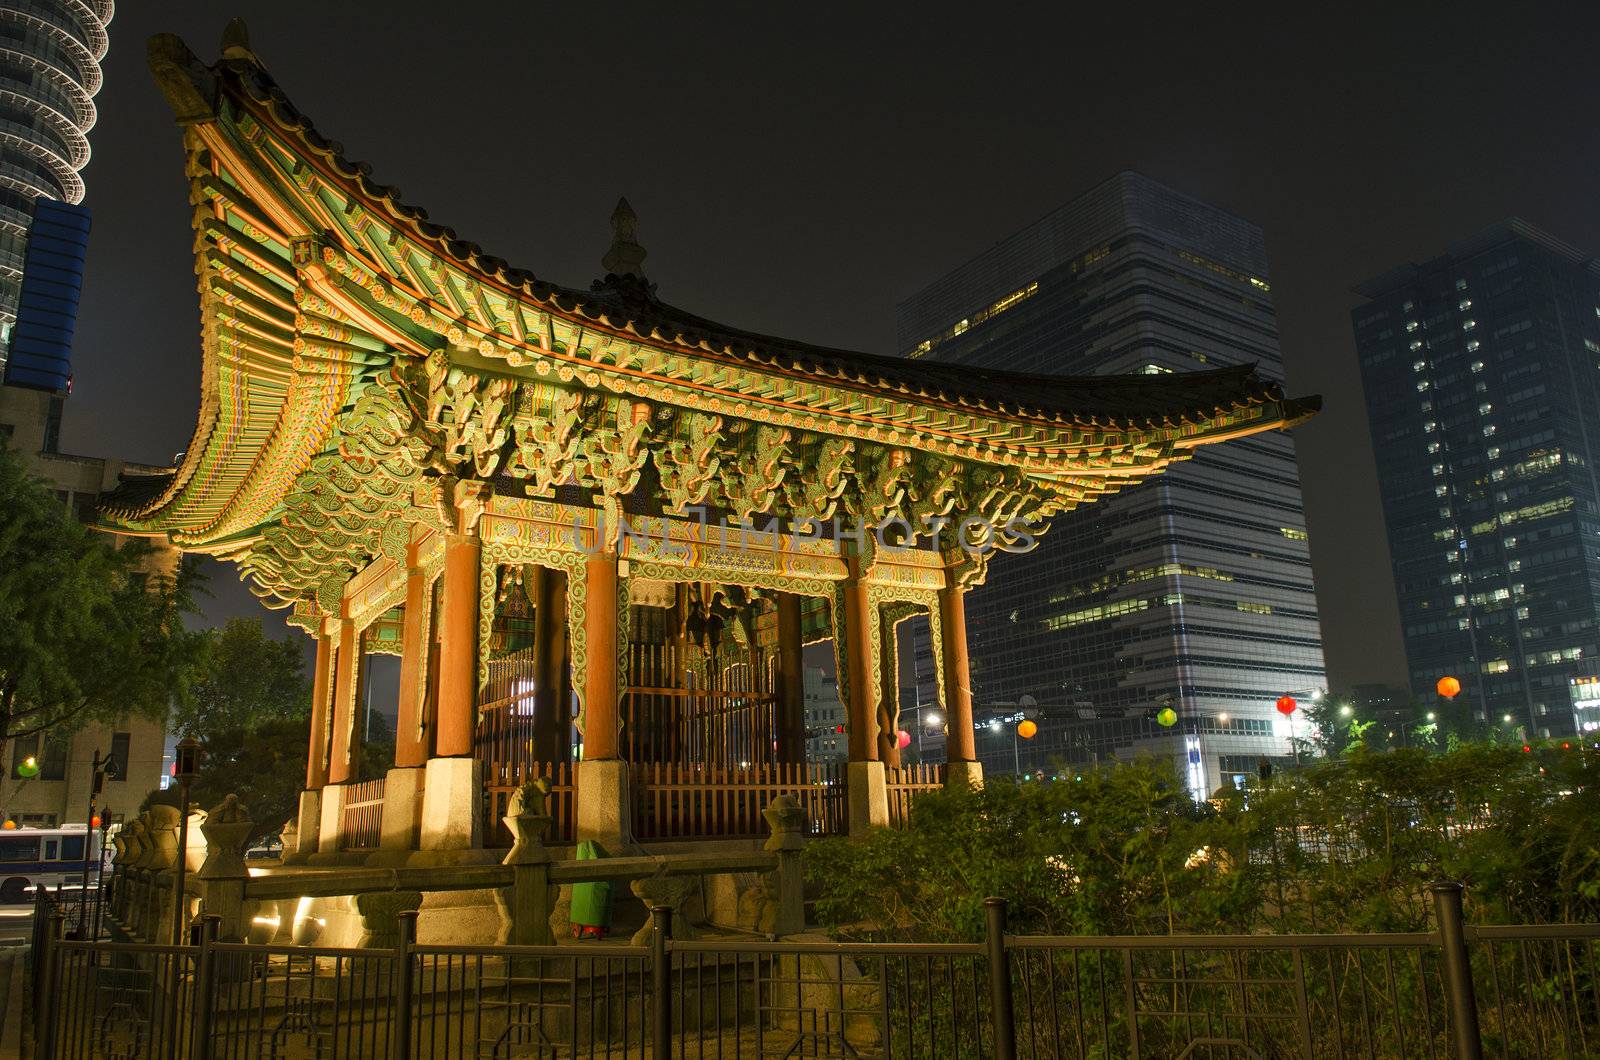 temple in central seoul south korea at night by jackmalipan